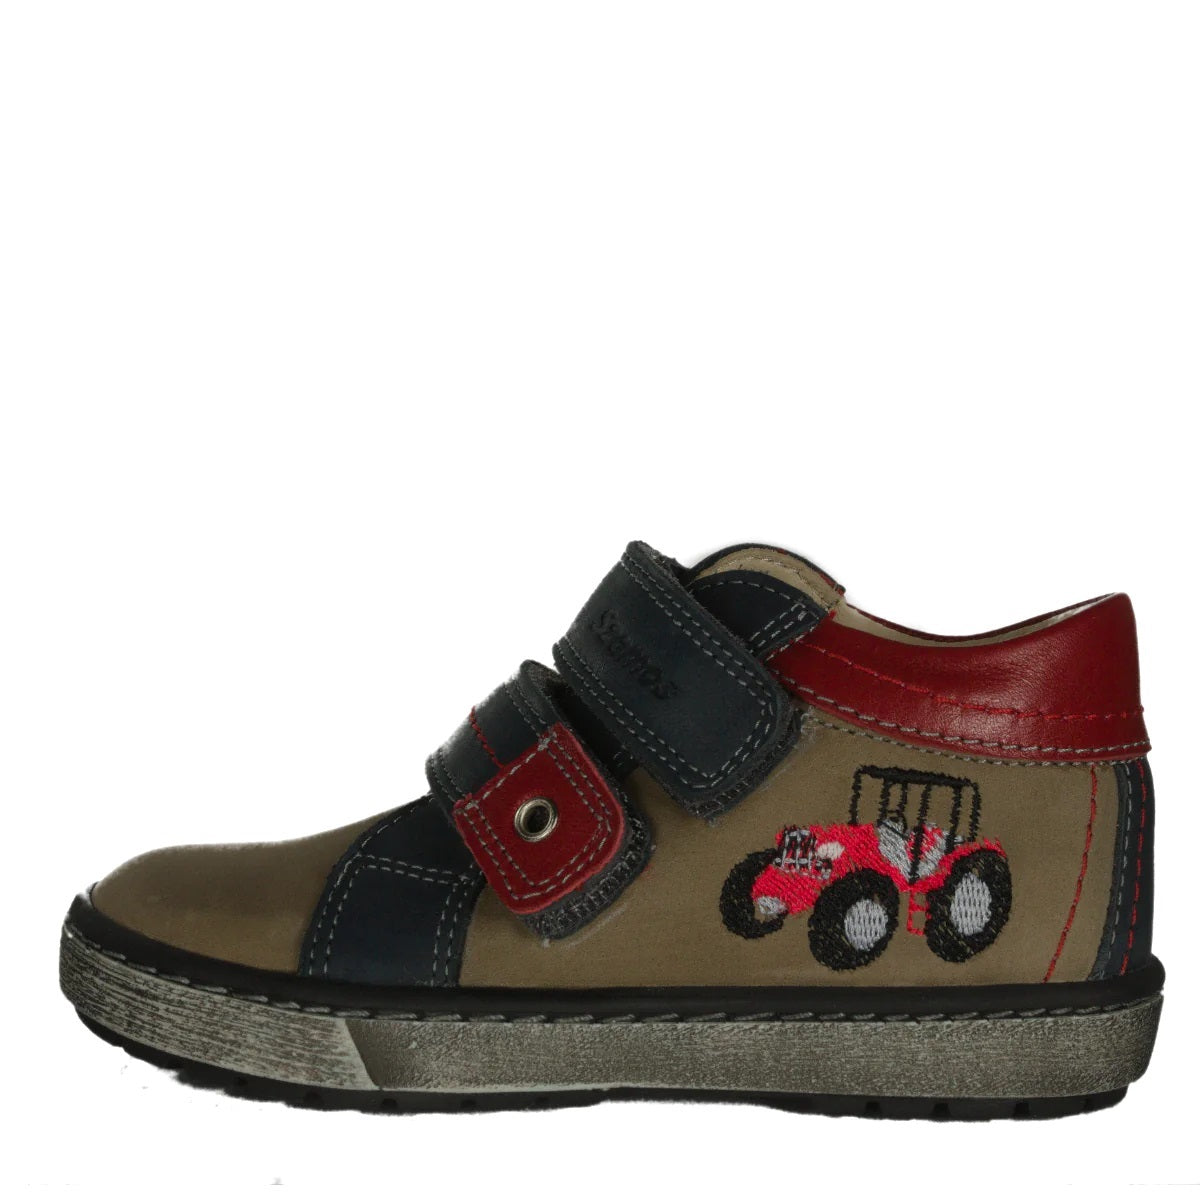 Szamos kid boy sneakers light brown with red tractor decor toddler/little kid/big kid size